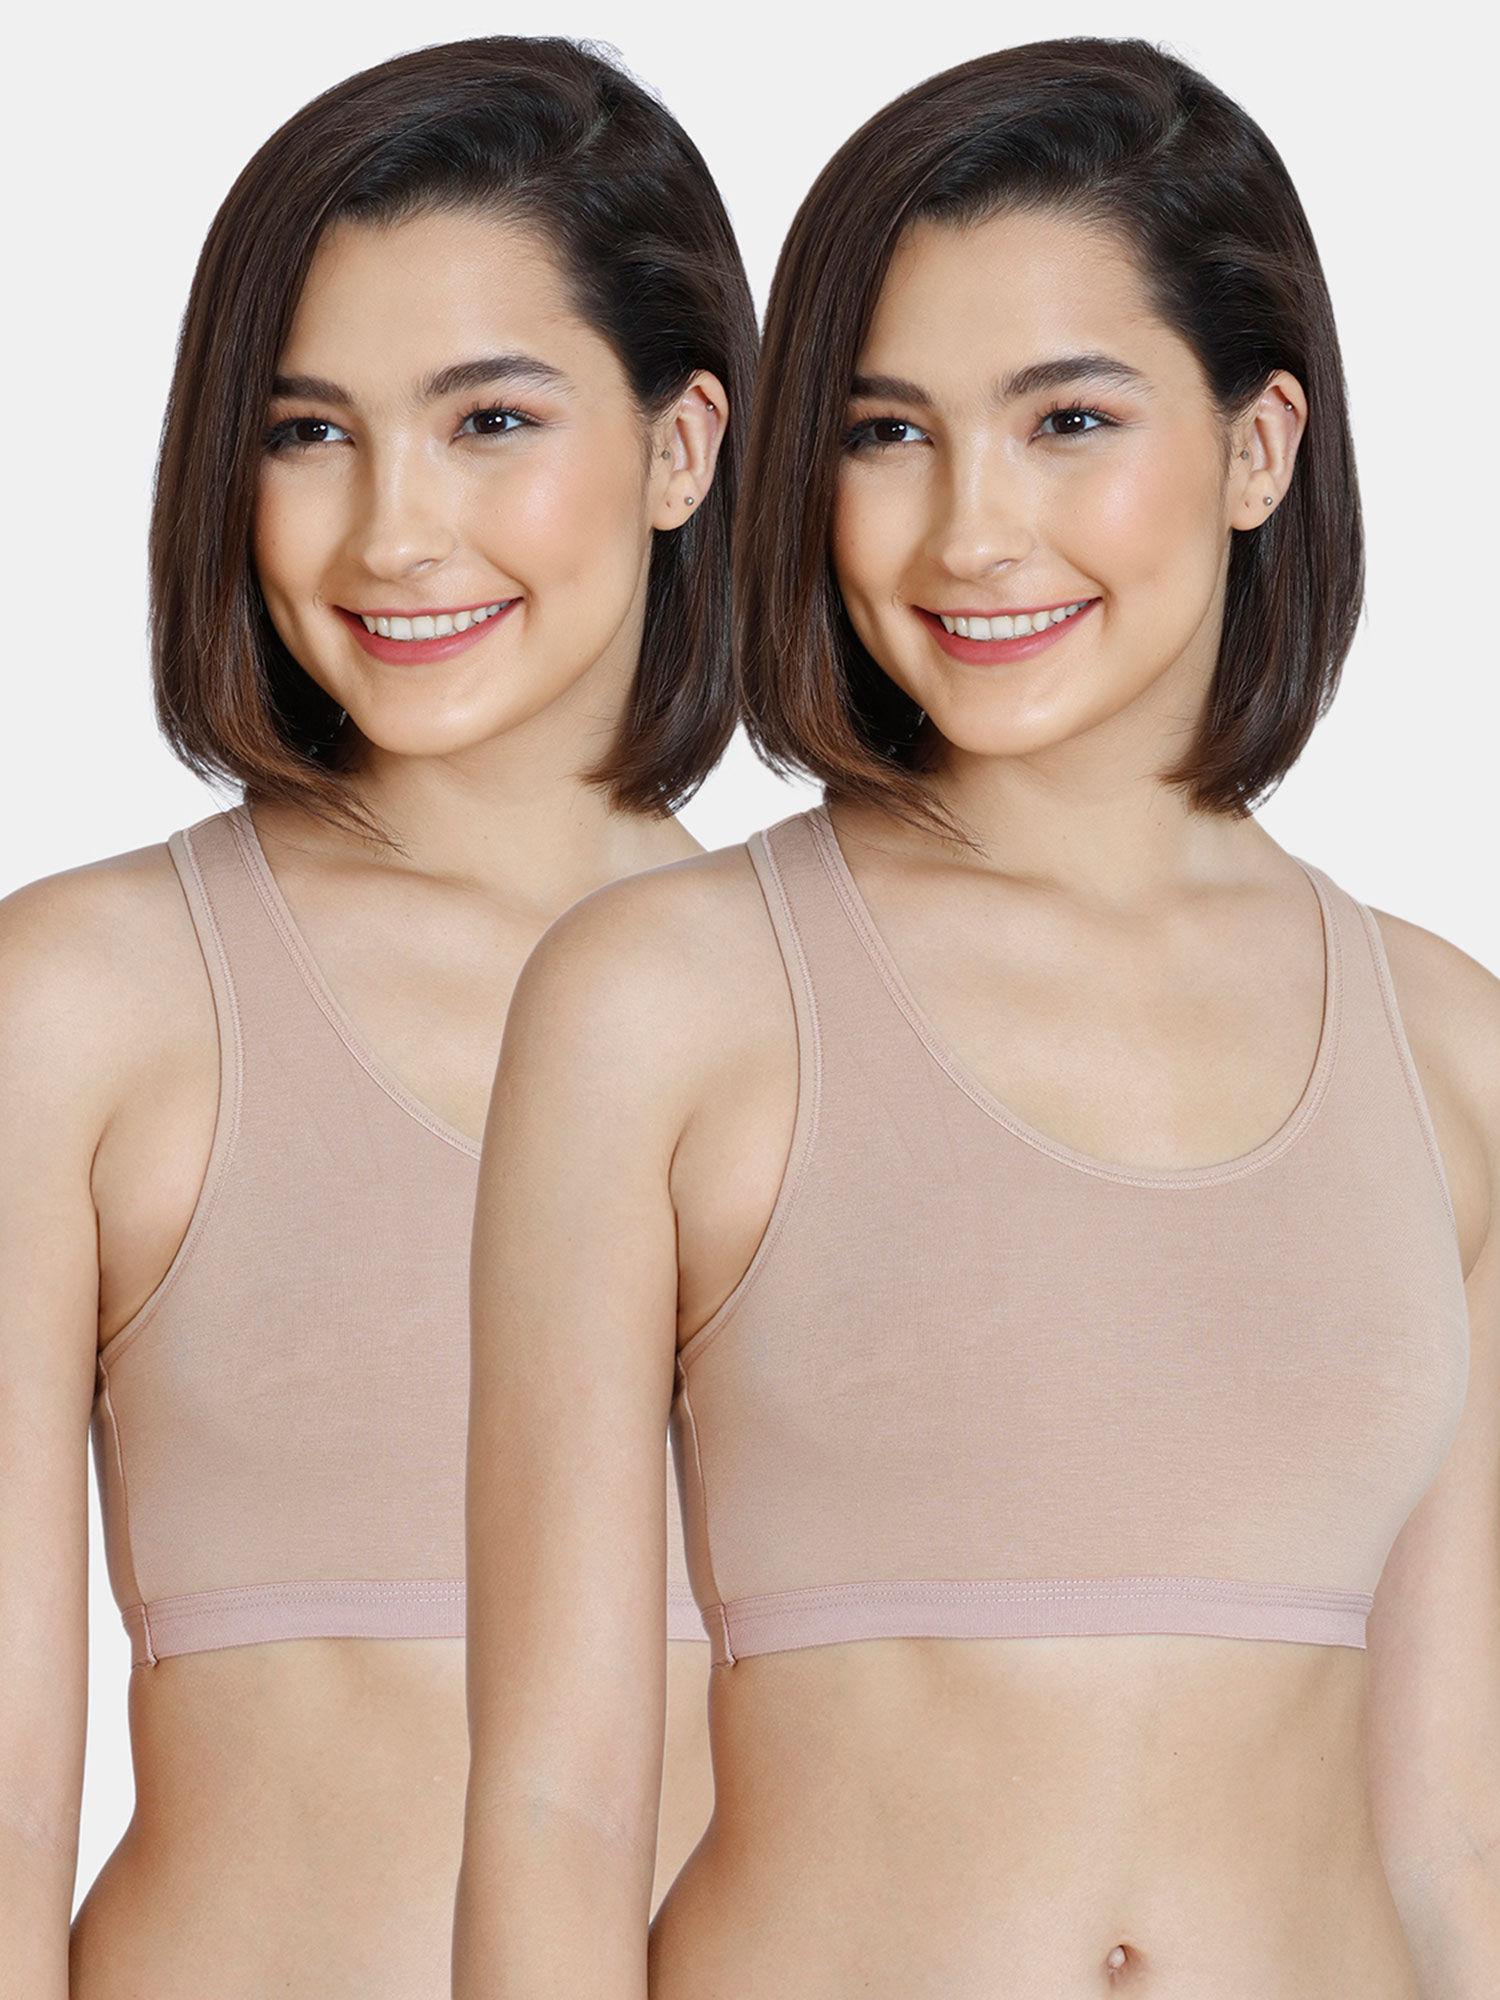 Girls Double Layered Non Wired Sports Bra Roebuck Beige (Pack of 2)